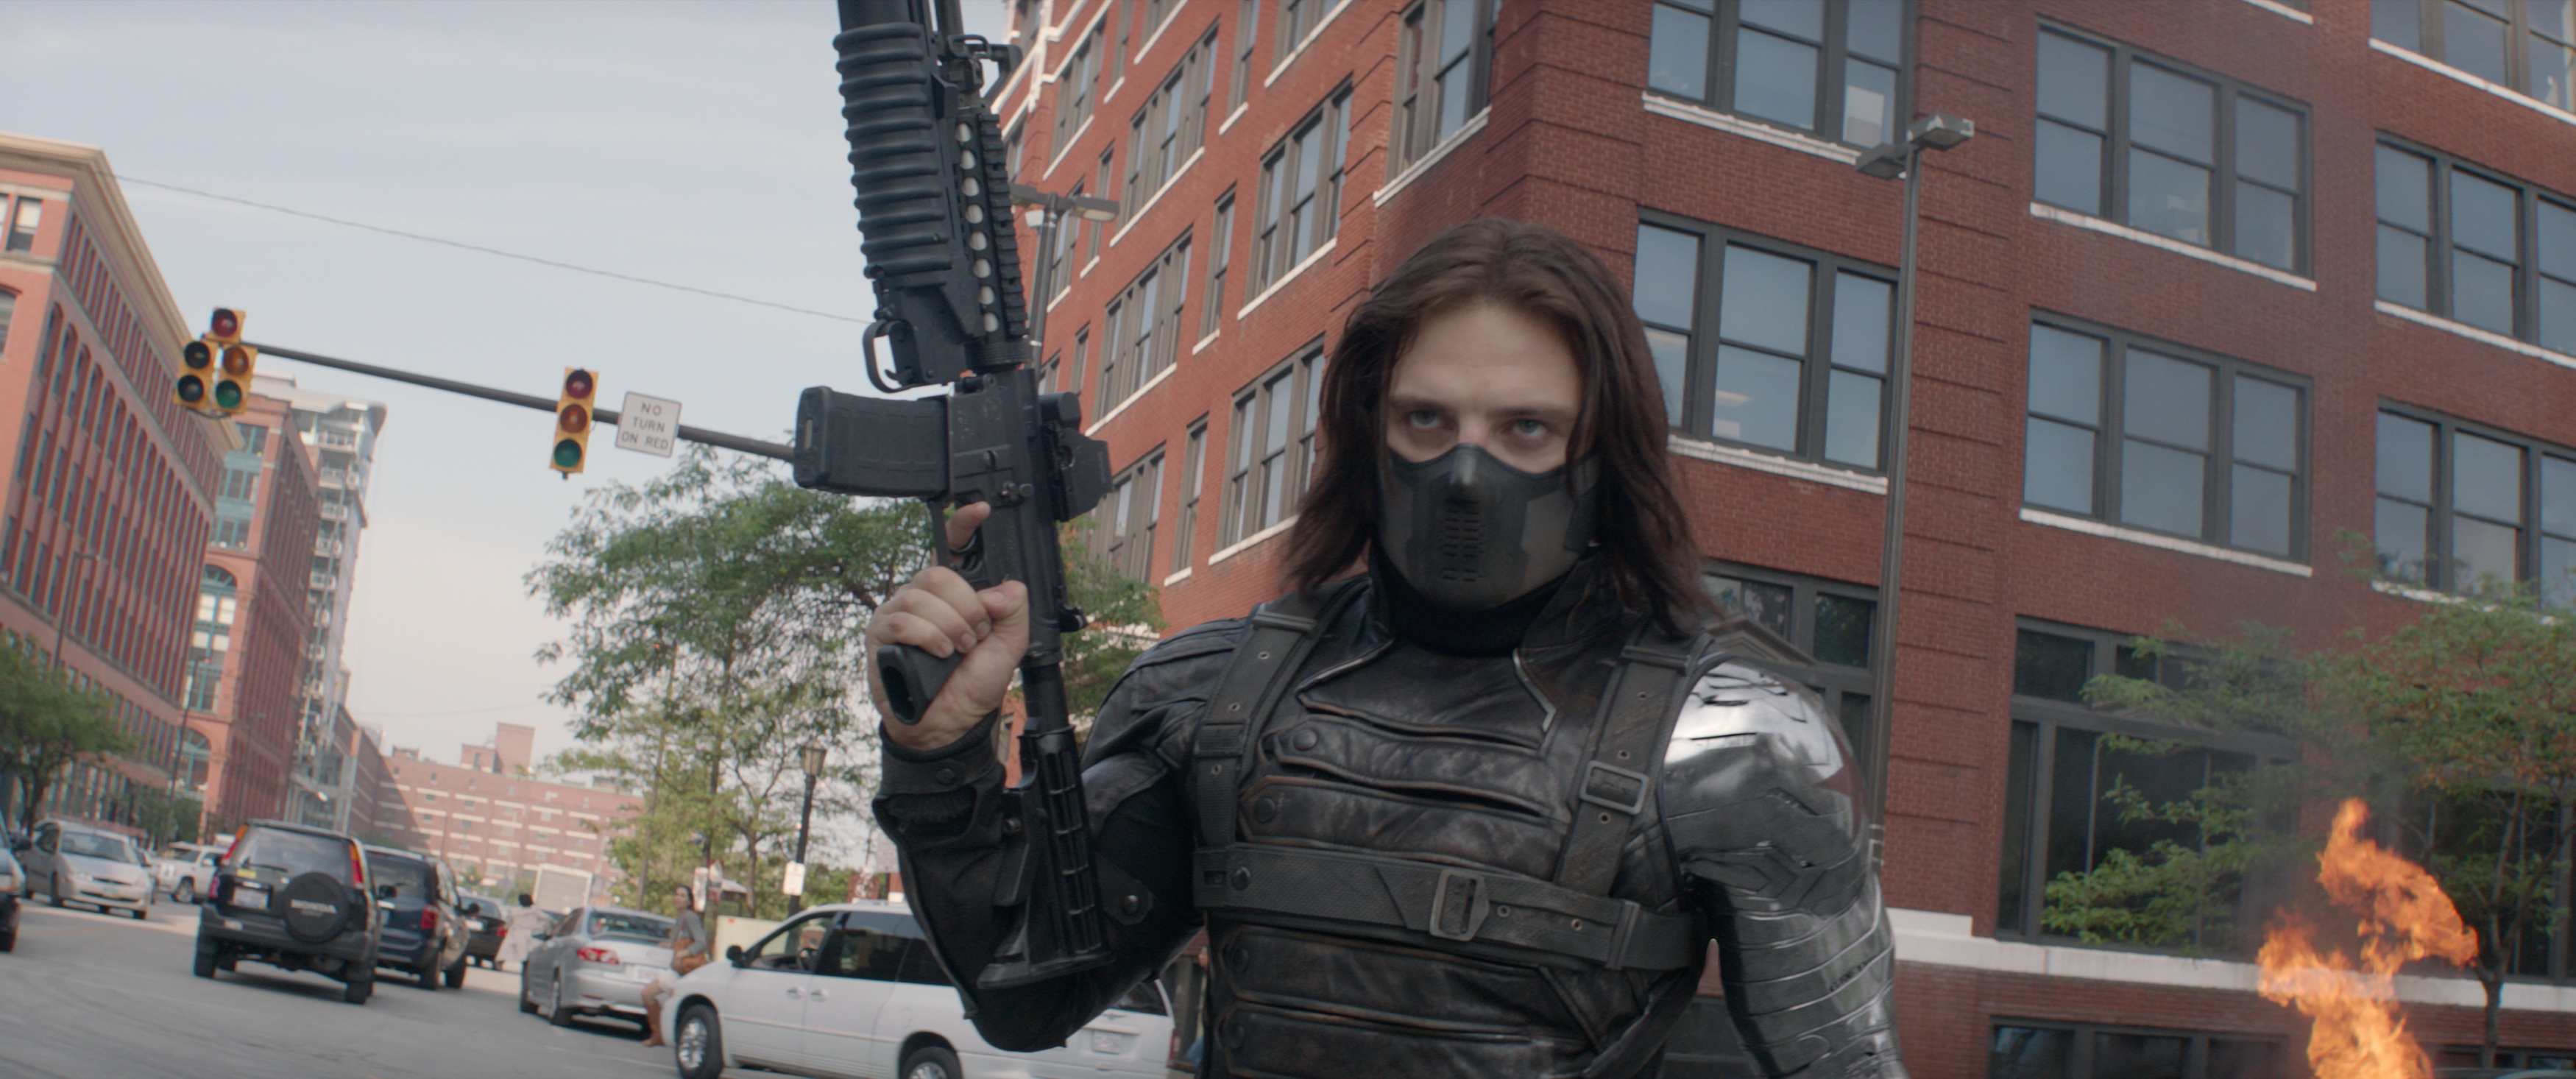 movie, captain america: the winter soldier, sebastian stan, winter soldier, captain america High Definition image